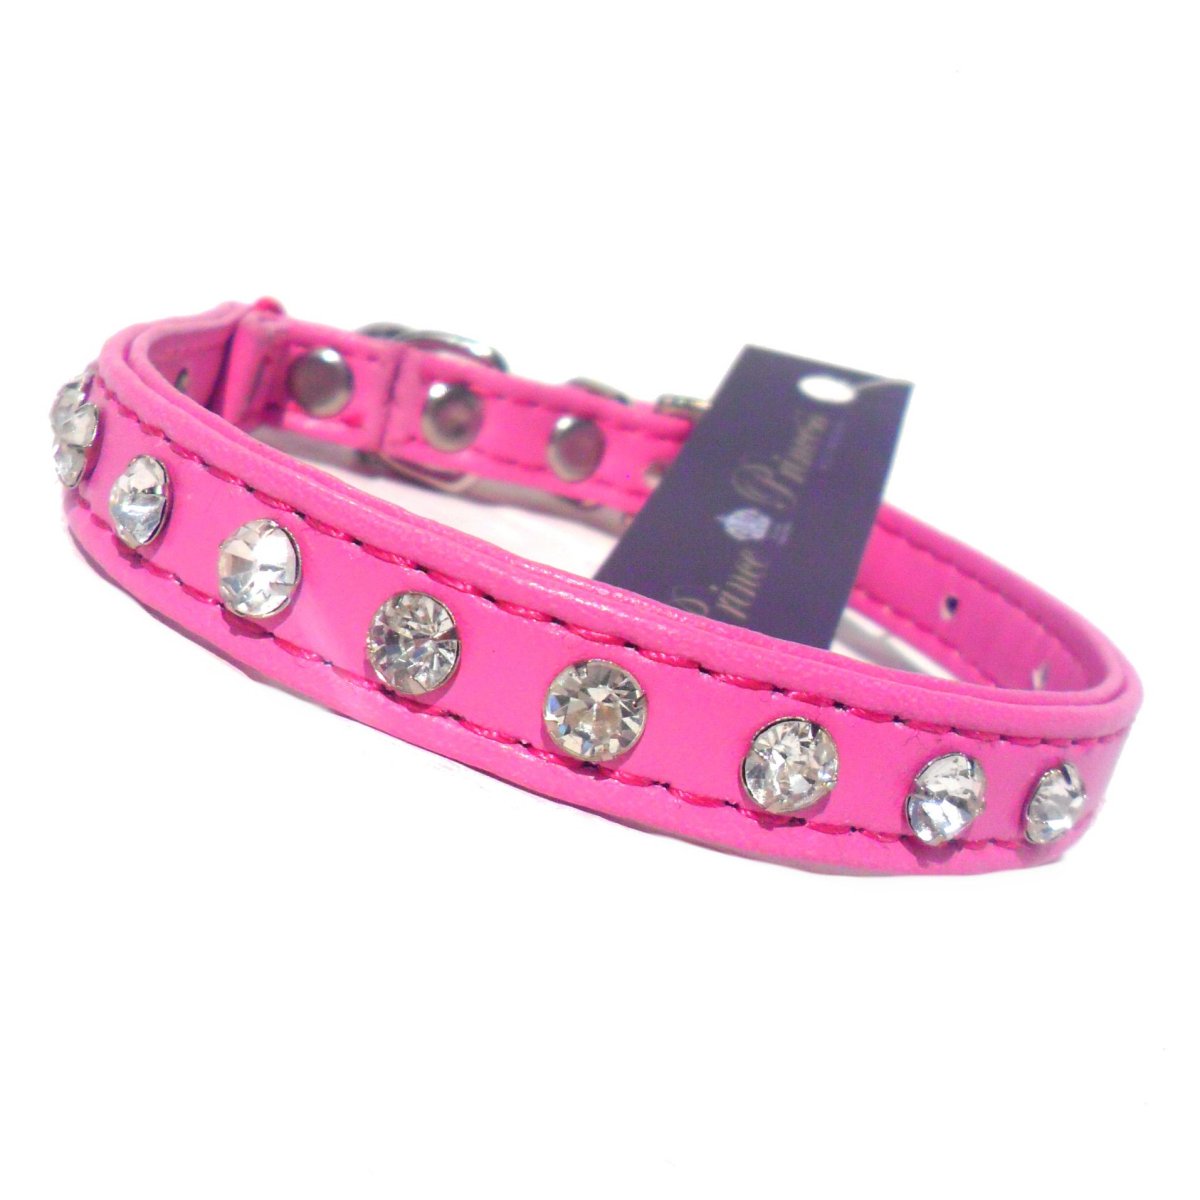 Glamour Puss Cat Collar Cat Collars | Clothes for Cats